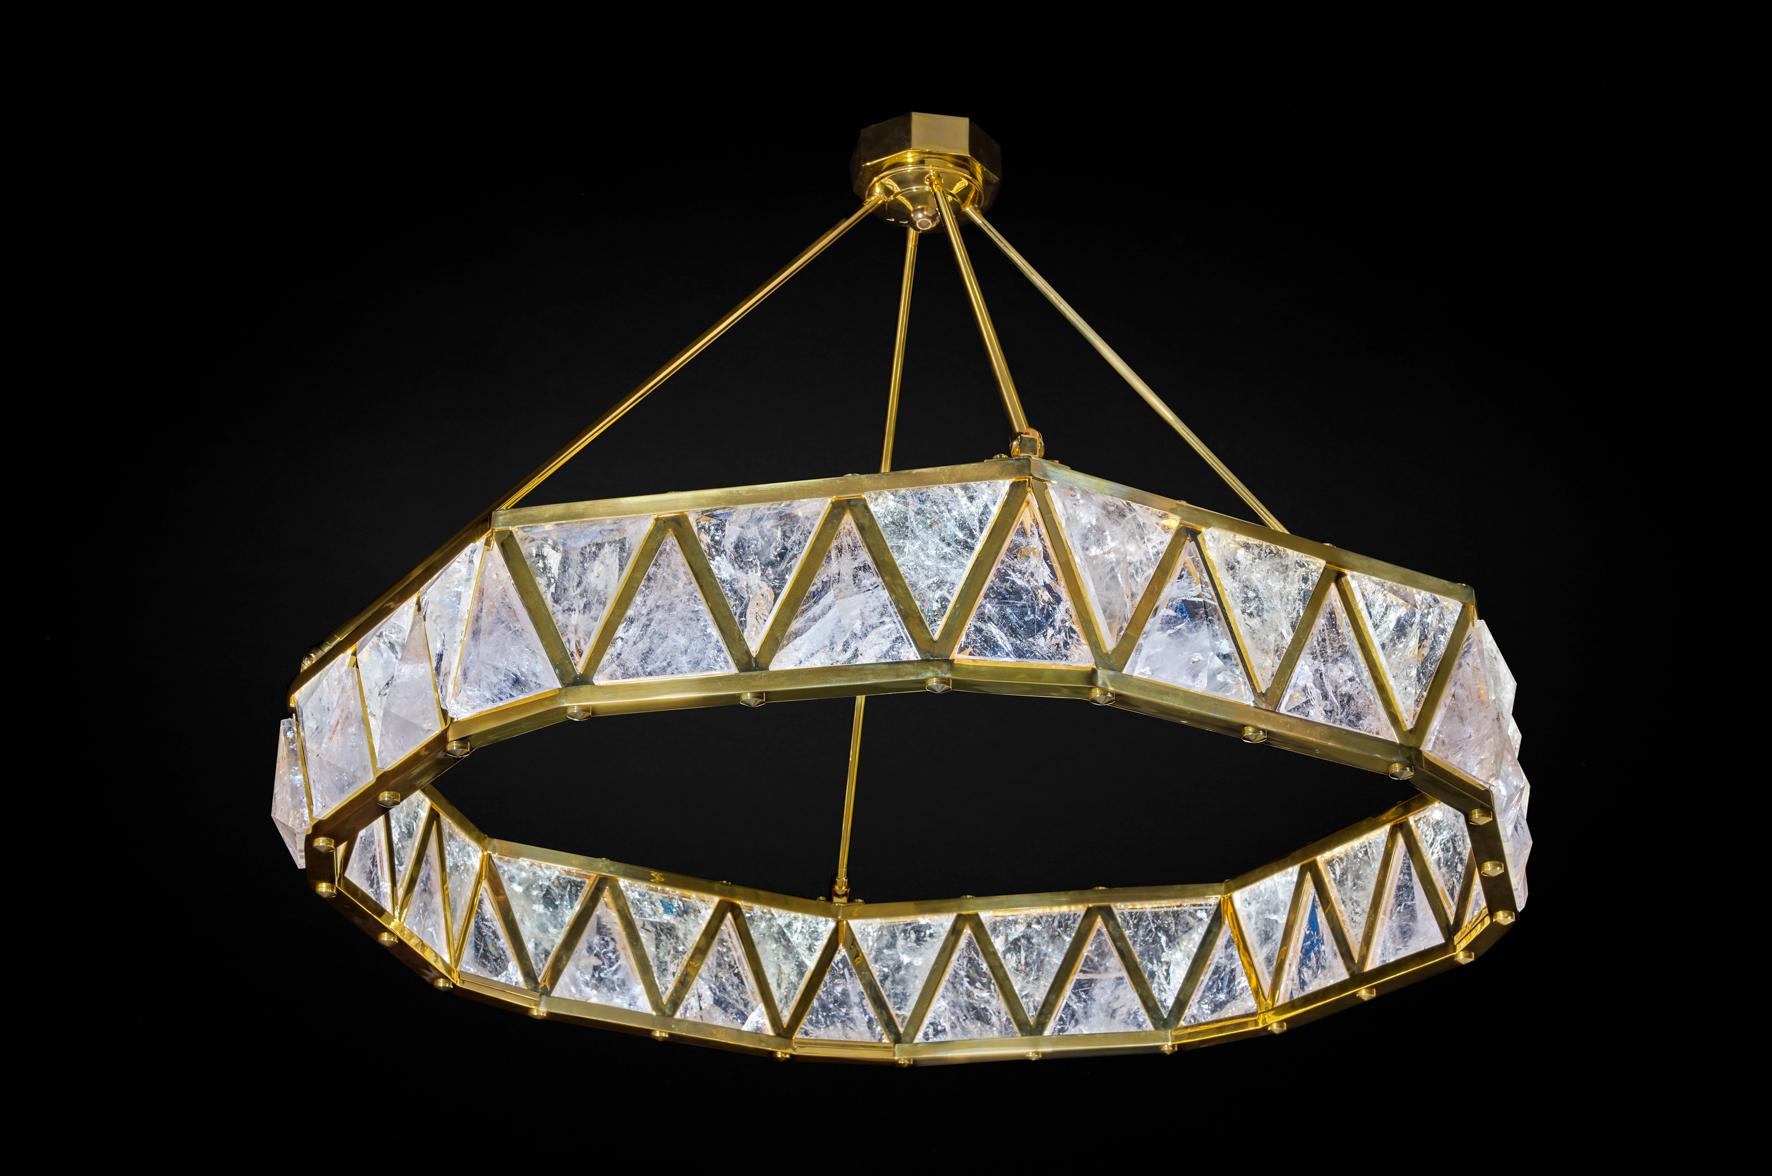 Ultimate Diadem Chandelier.
Is it still a chandelier or a jewel?.
Only made by hand in France by the best art workers .
Brass ,24 K gold plated (same as used by the most prestigious french brands ...),rock crystal stones .
Made only by request